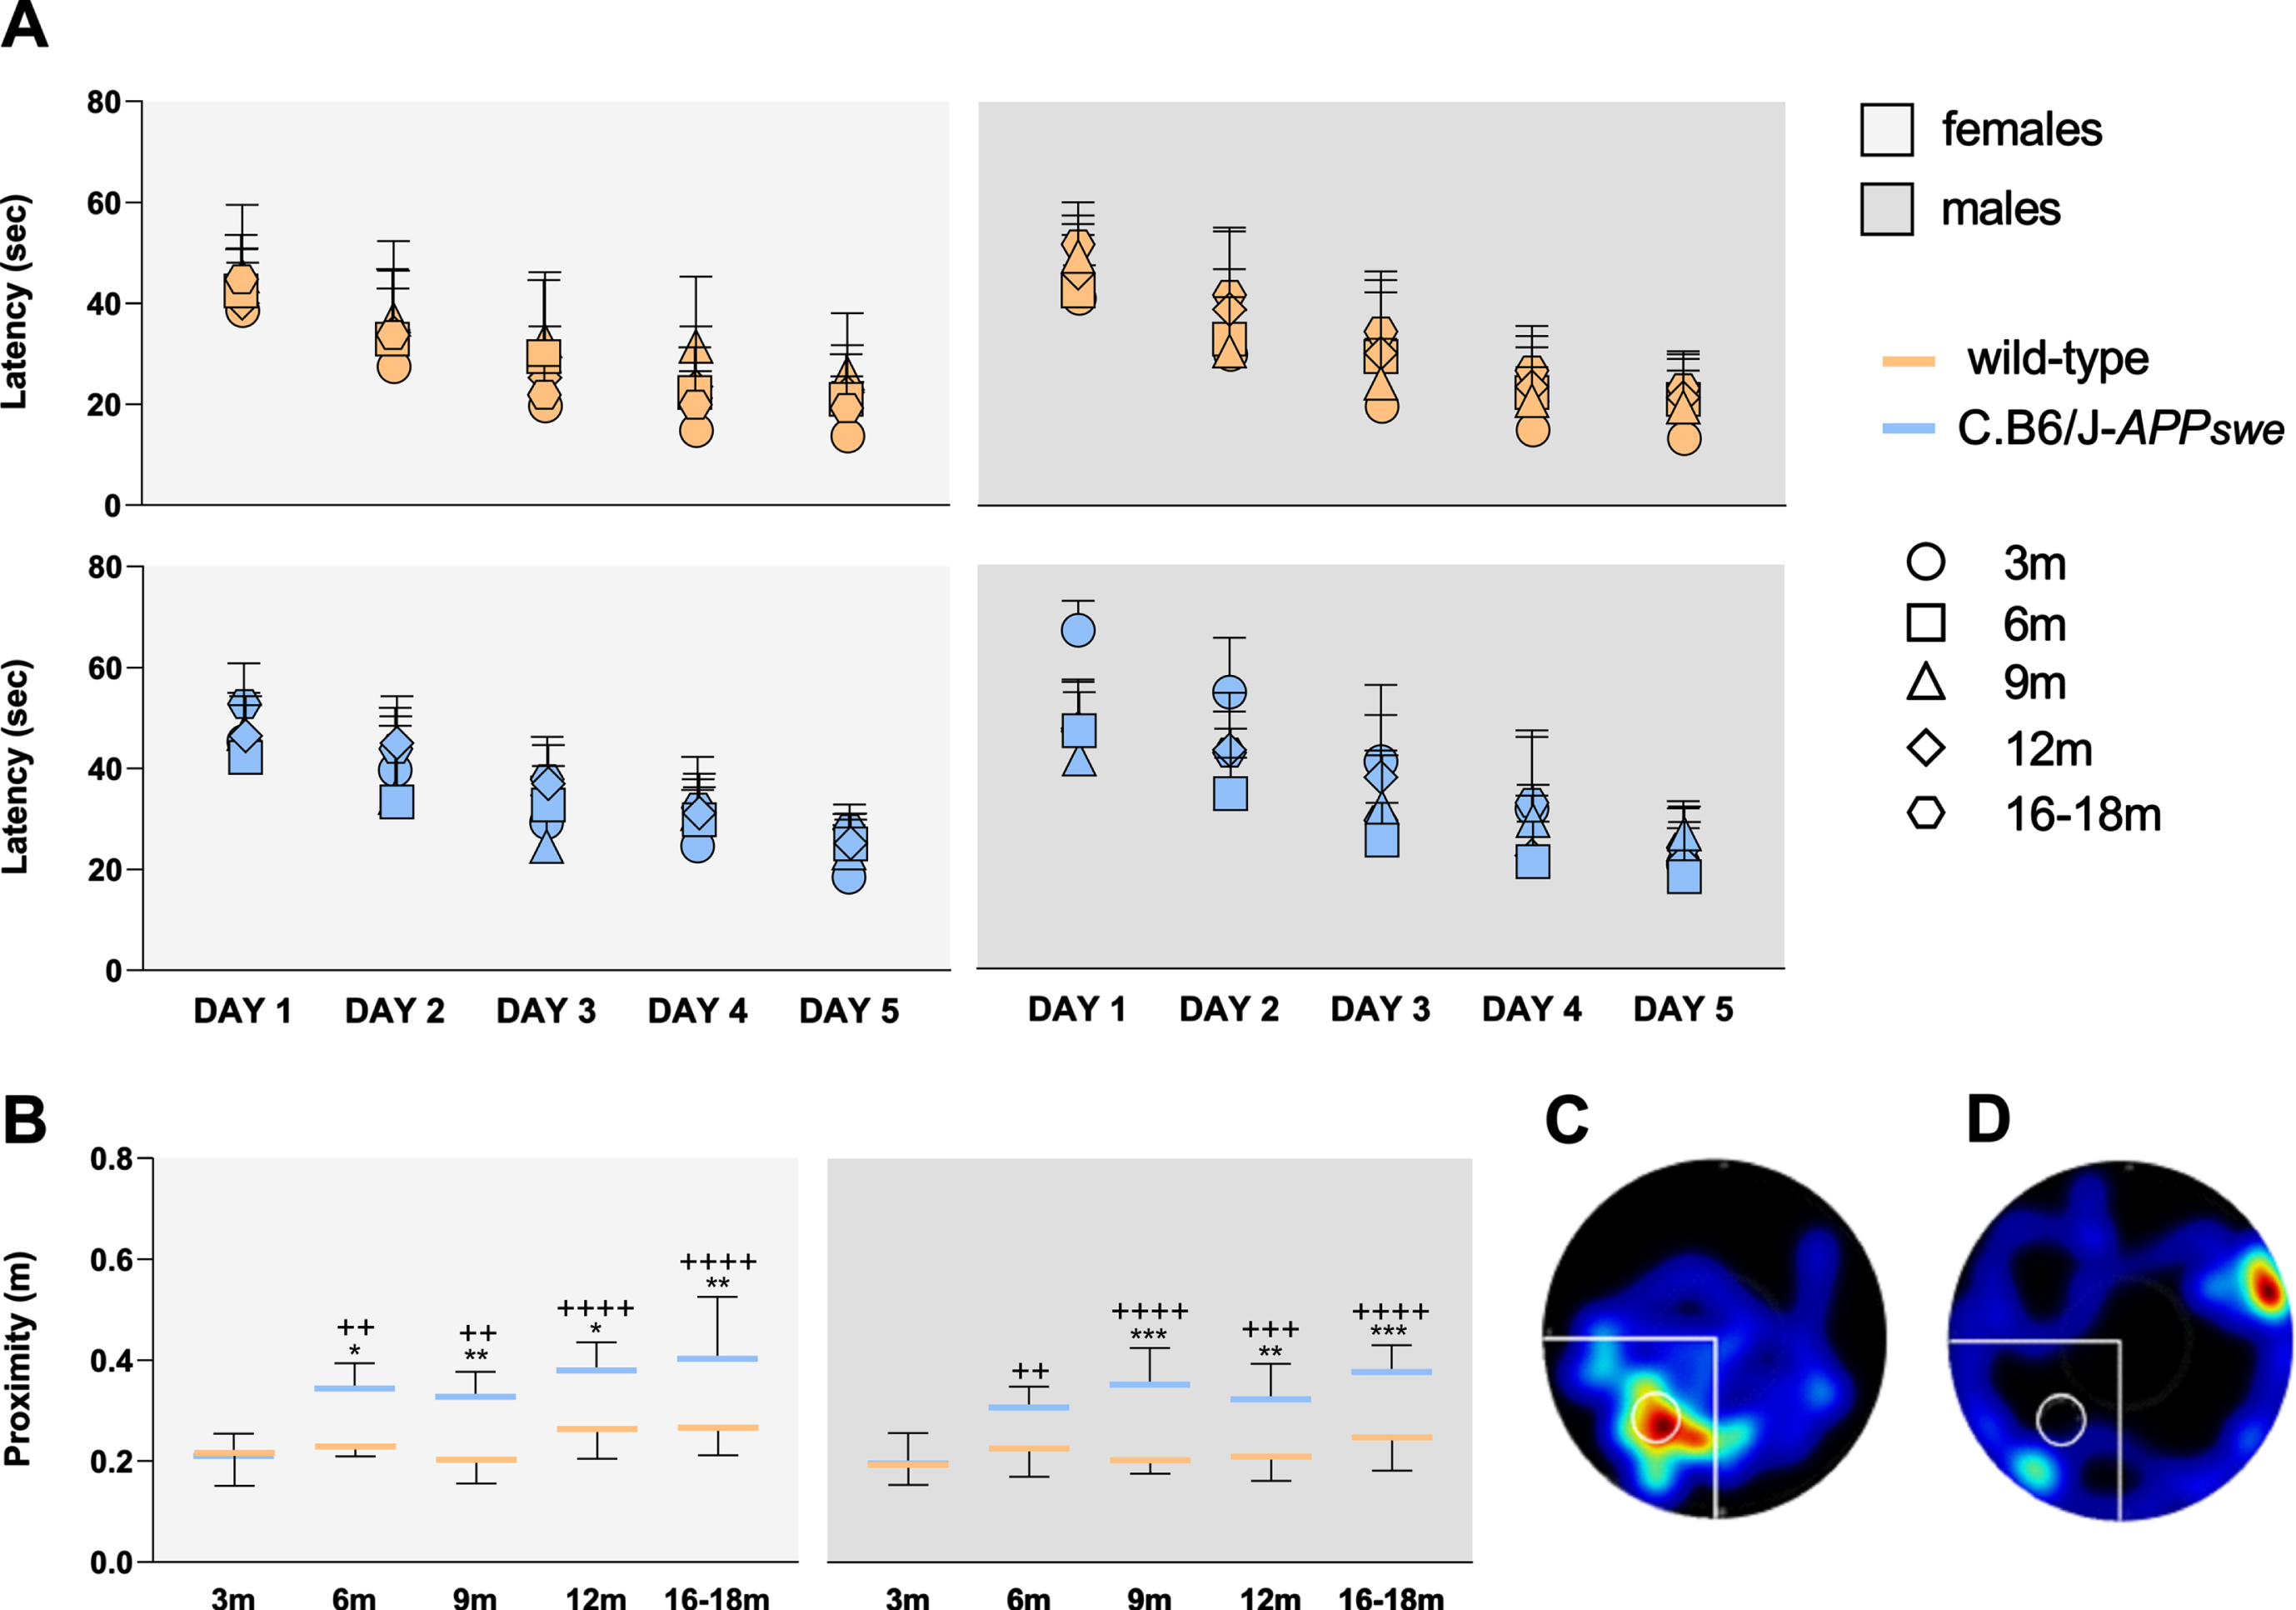 Animals of both genotypes and sexes show no deficits in spatial learning at all ages, while the long-term spatial memory is impaired in C.B6/J-APPswe mice, earlier in females than in males. A) All animals learned the task (i.e., significant reduction from day 1 to day 5 of the time spent to reach the platform). B) Congenic females aged 6, 9, 12 and 16–18 months had significantly higher proximity than age-matched wild-type females, as had congenic males aged 9, 12 and 16–18 months compared to age-matched controls. C, D) Images reported the heatmaps (colors range from blue to red tones due to the progressive increase in time spent in a zone) representing a good performer (C) and a bad performer (D) during the probe phase. The first animal swam almost all its time around the previous position of the platform (white circle), while the latter animal swam mainly outside the target quadrant (white lines). Eight male and eight female animals of each genotype were analyzed per age point. A) Two-way ANOVA for repeated measures and Holm-Sidak test; B) Two-way ANOVA and Tukey’s test. *p < 0.05, **p < 0.01, ***p < 0.001 [C.B6/J-APPswe versus age-matched wild-type mice]; ++p < 0.01, +++p < 0.001, ++++p < 0.0001 [C.B6/J-APPswe mice versus C.B6/J-APPswe mice aged 3 months].